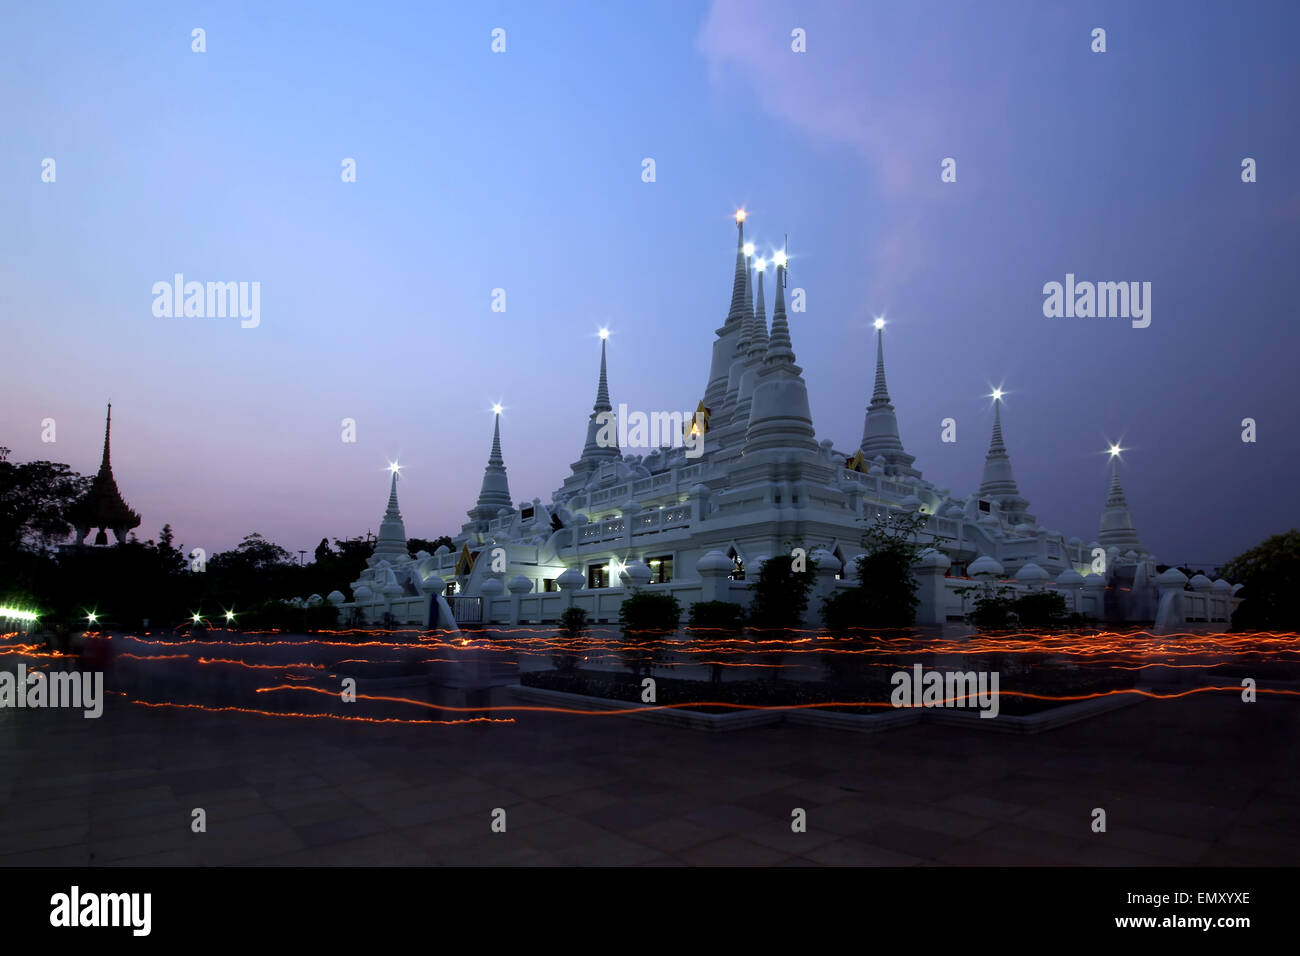 The thai culture walk with lighted candles in hand around a temple(wian tian) Stock Photo